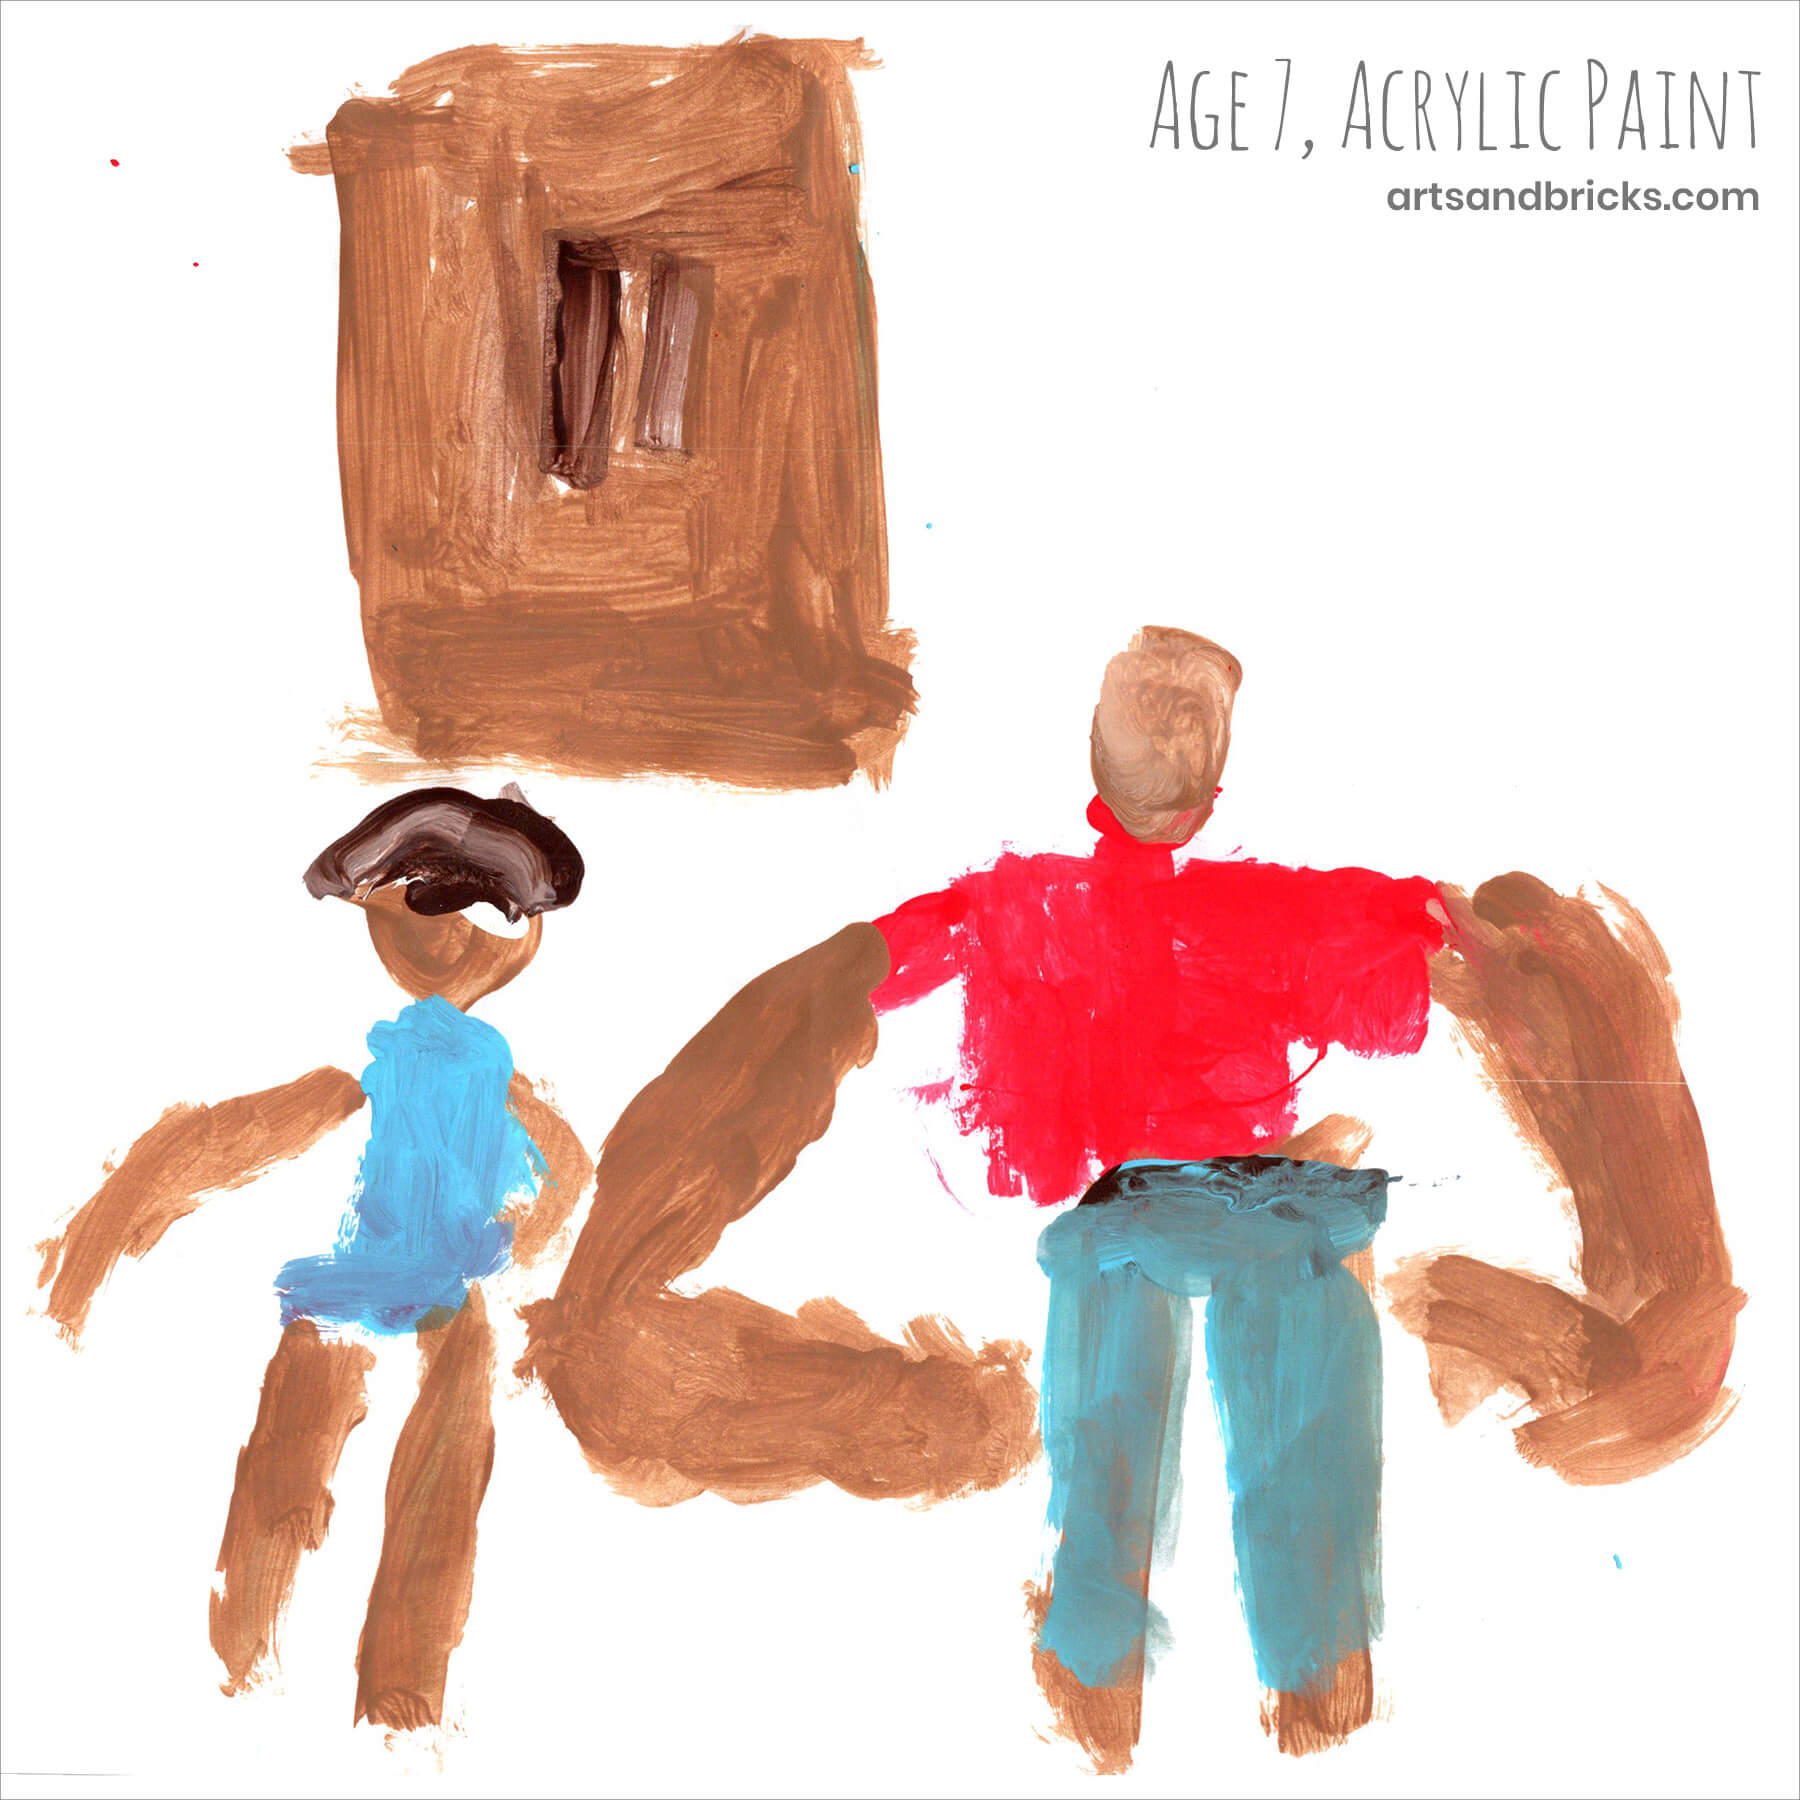 I'm fascinated by how my children draw, paint, and doodle themselves, our family, and others. The way their renderings of the human form have changed over the years is fascinating. 

Here is one my favorite drawings of people created by a favorite little person! 

Human Form - Age 7 - Acrylic Paint